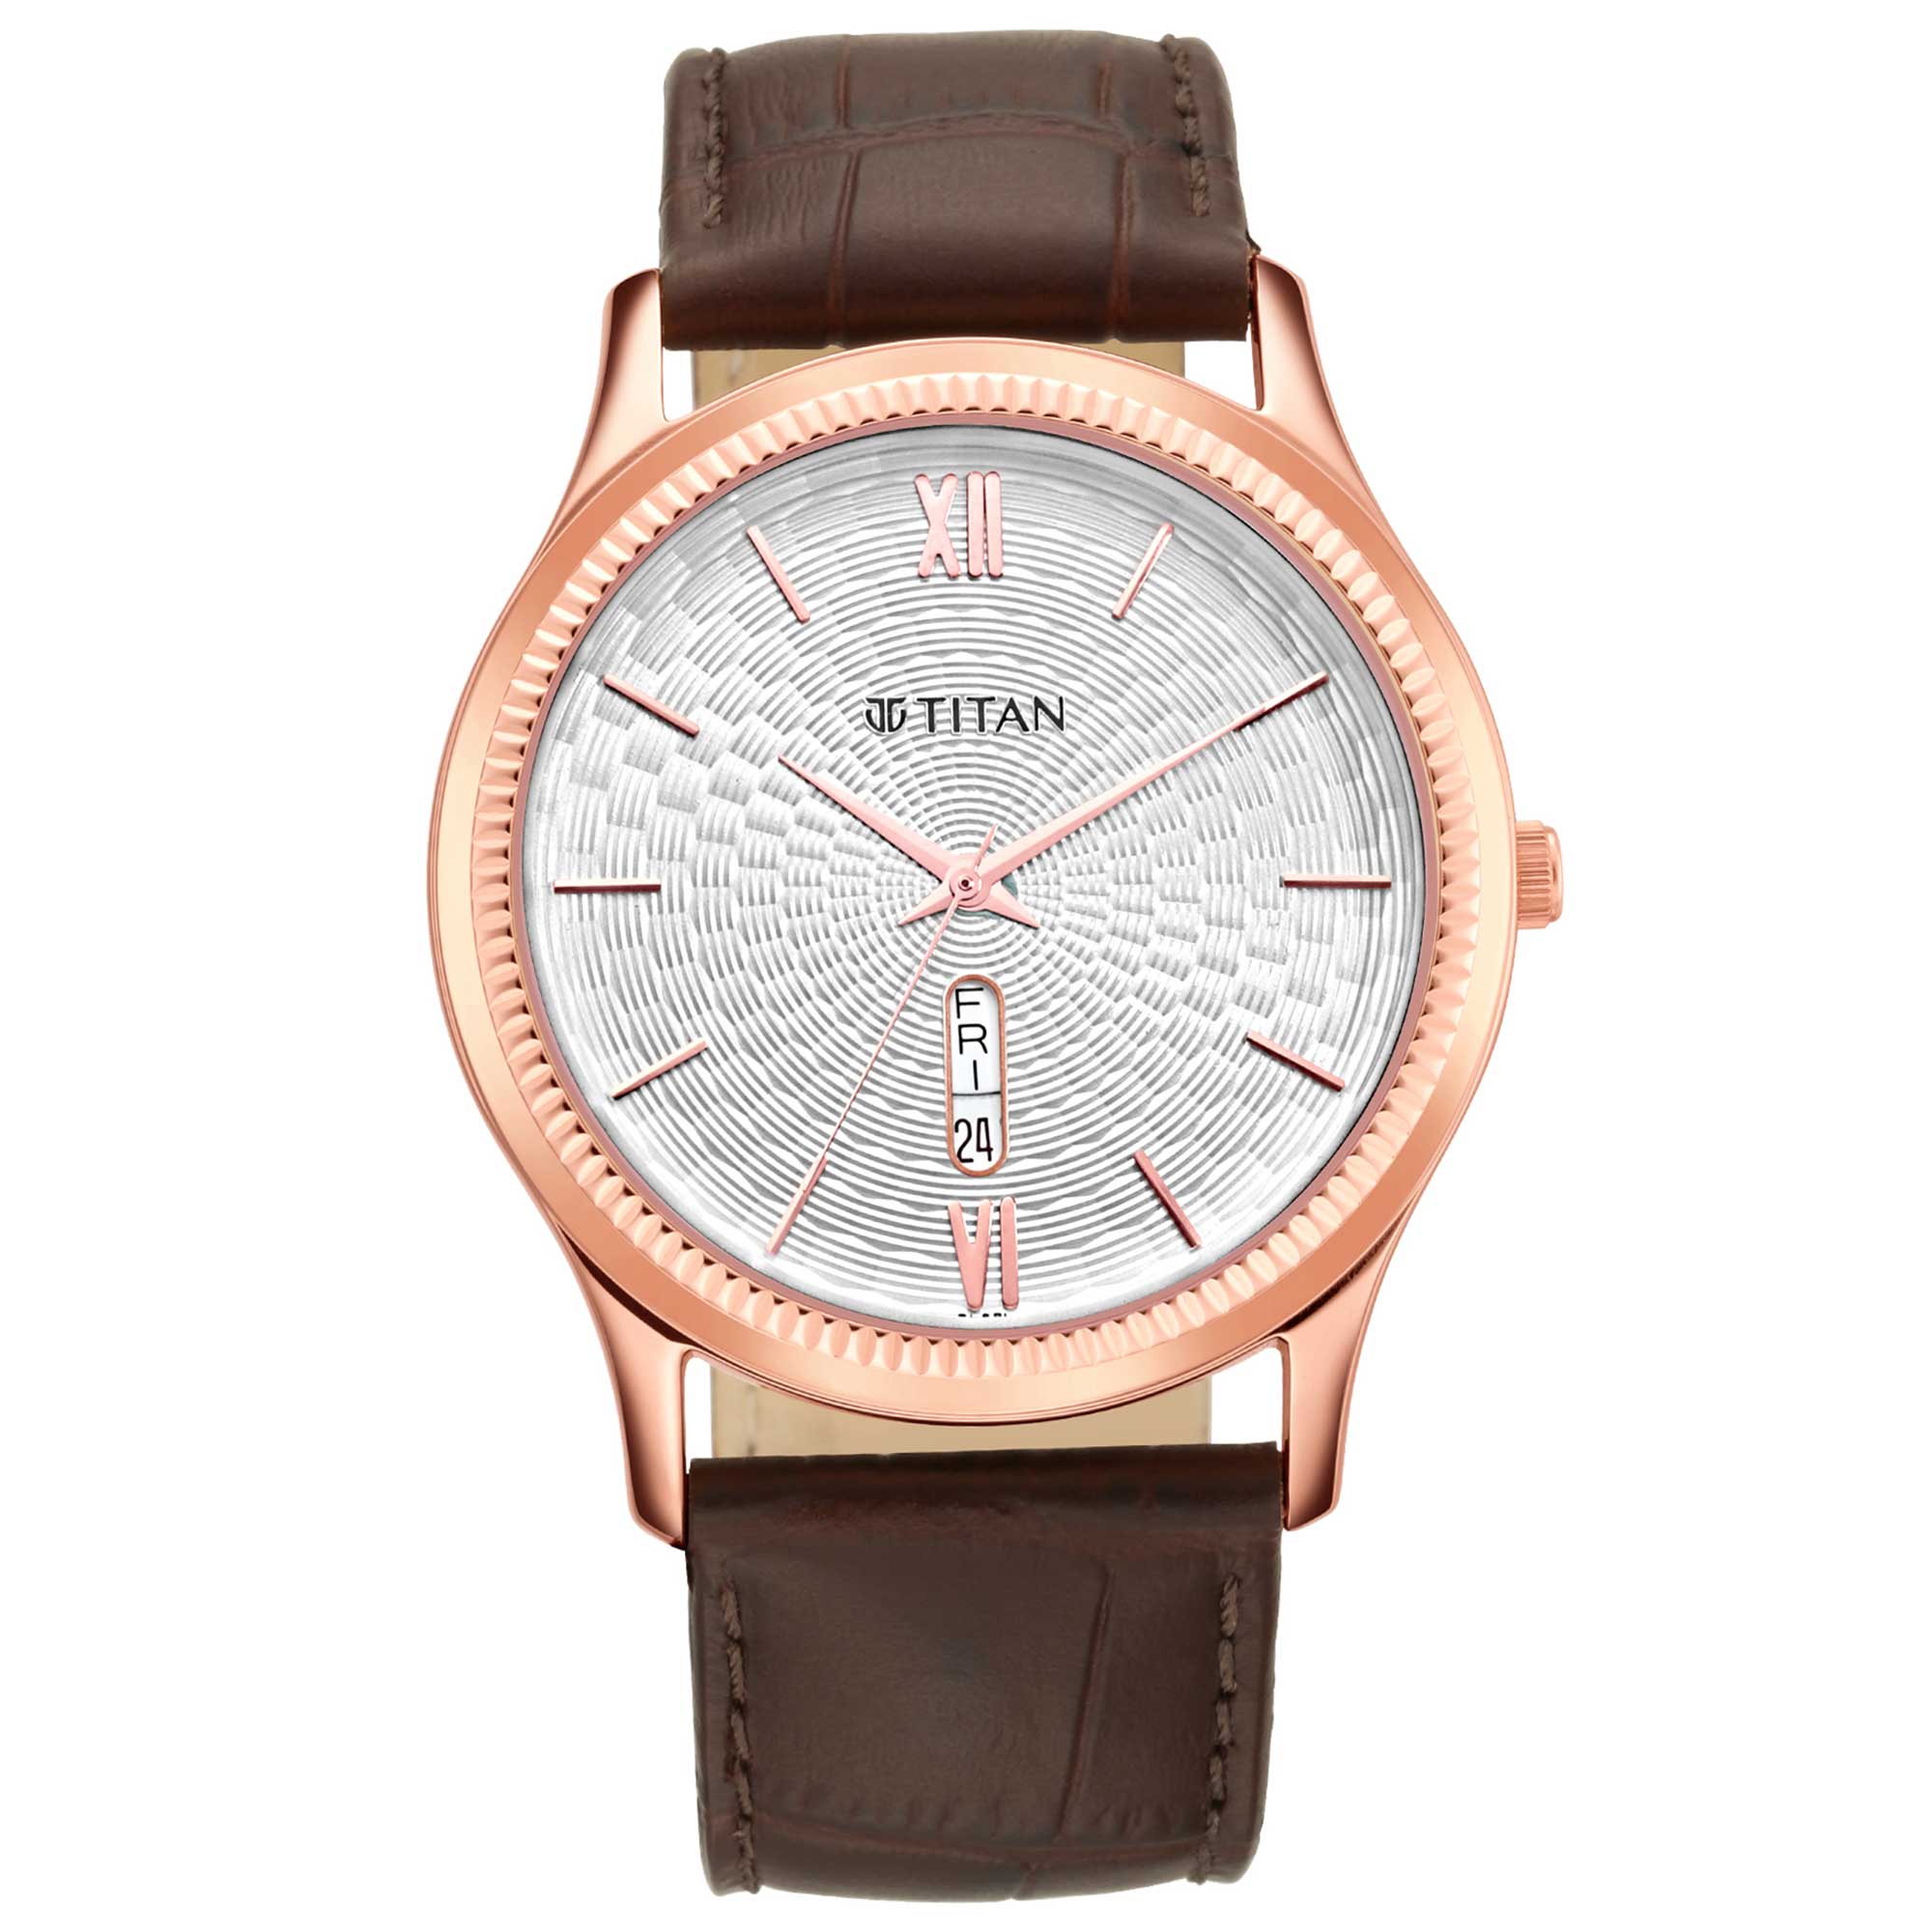 Titan Analog Day and Date White Dial Leather Strap watch for Men